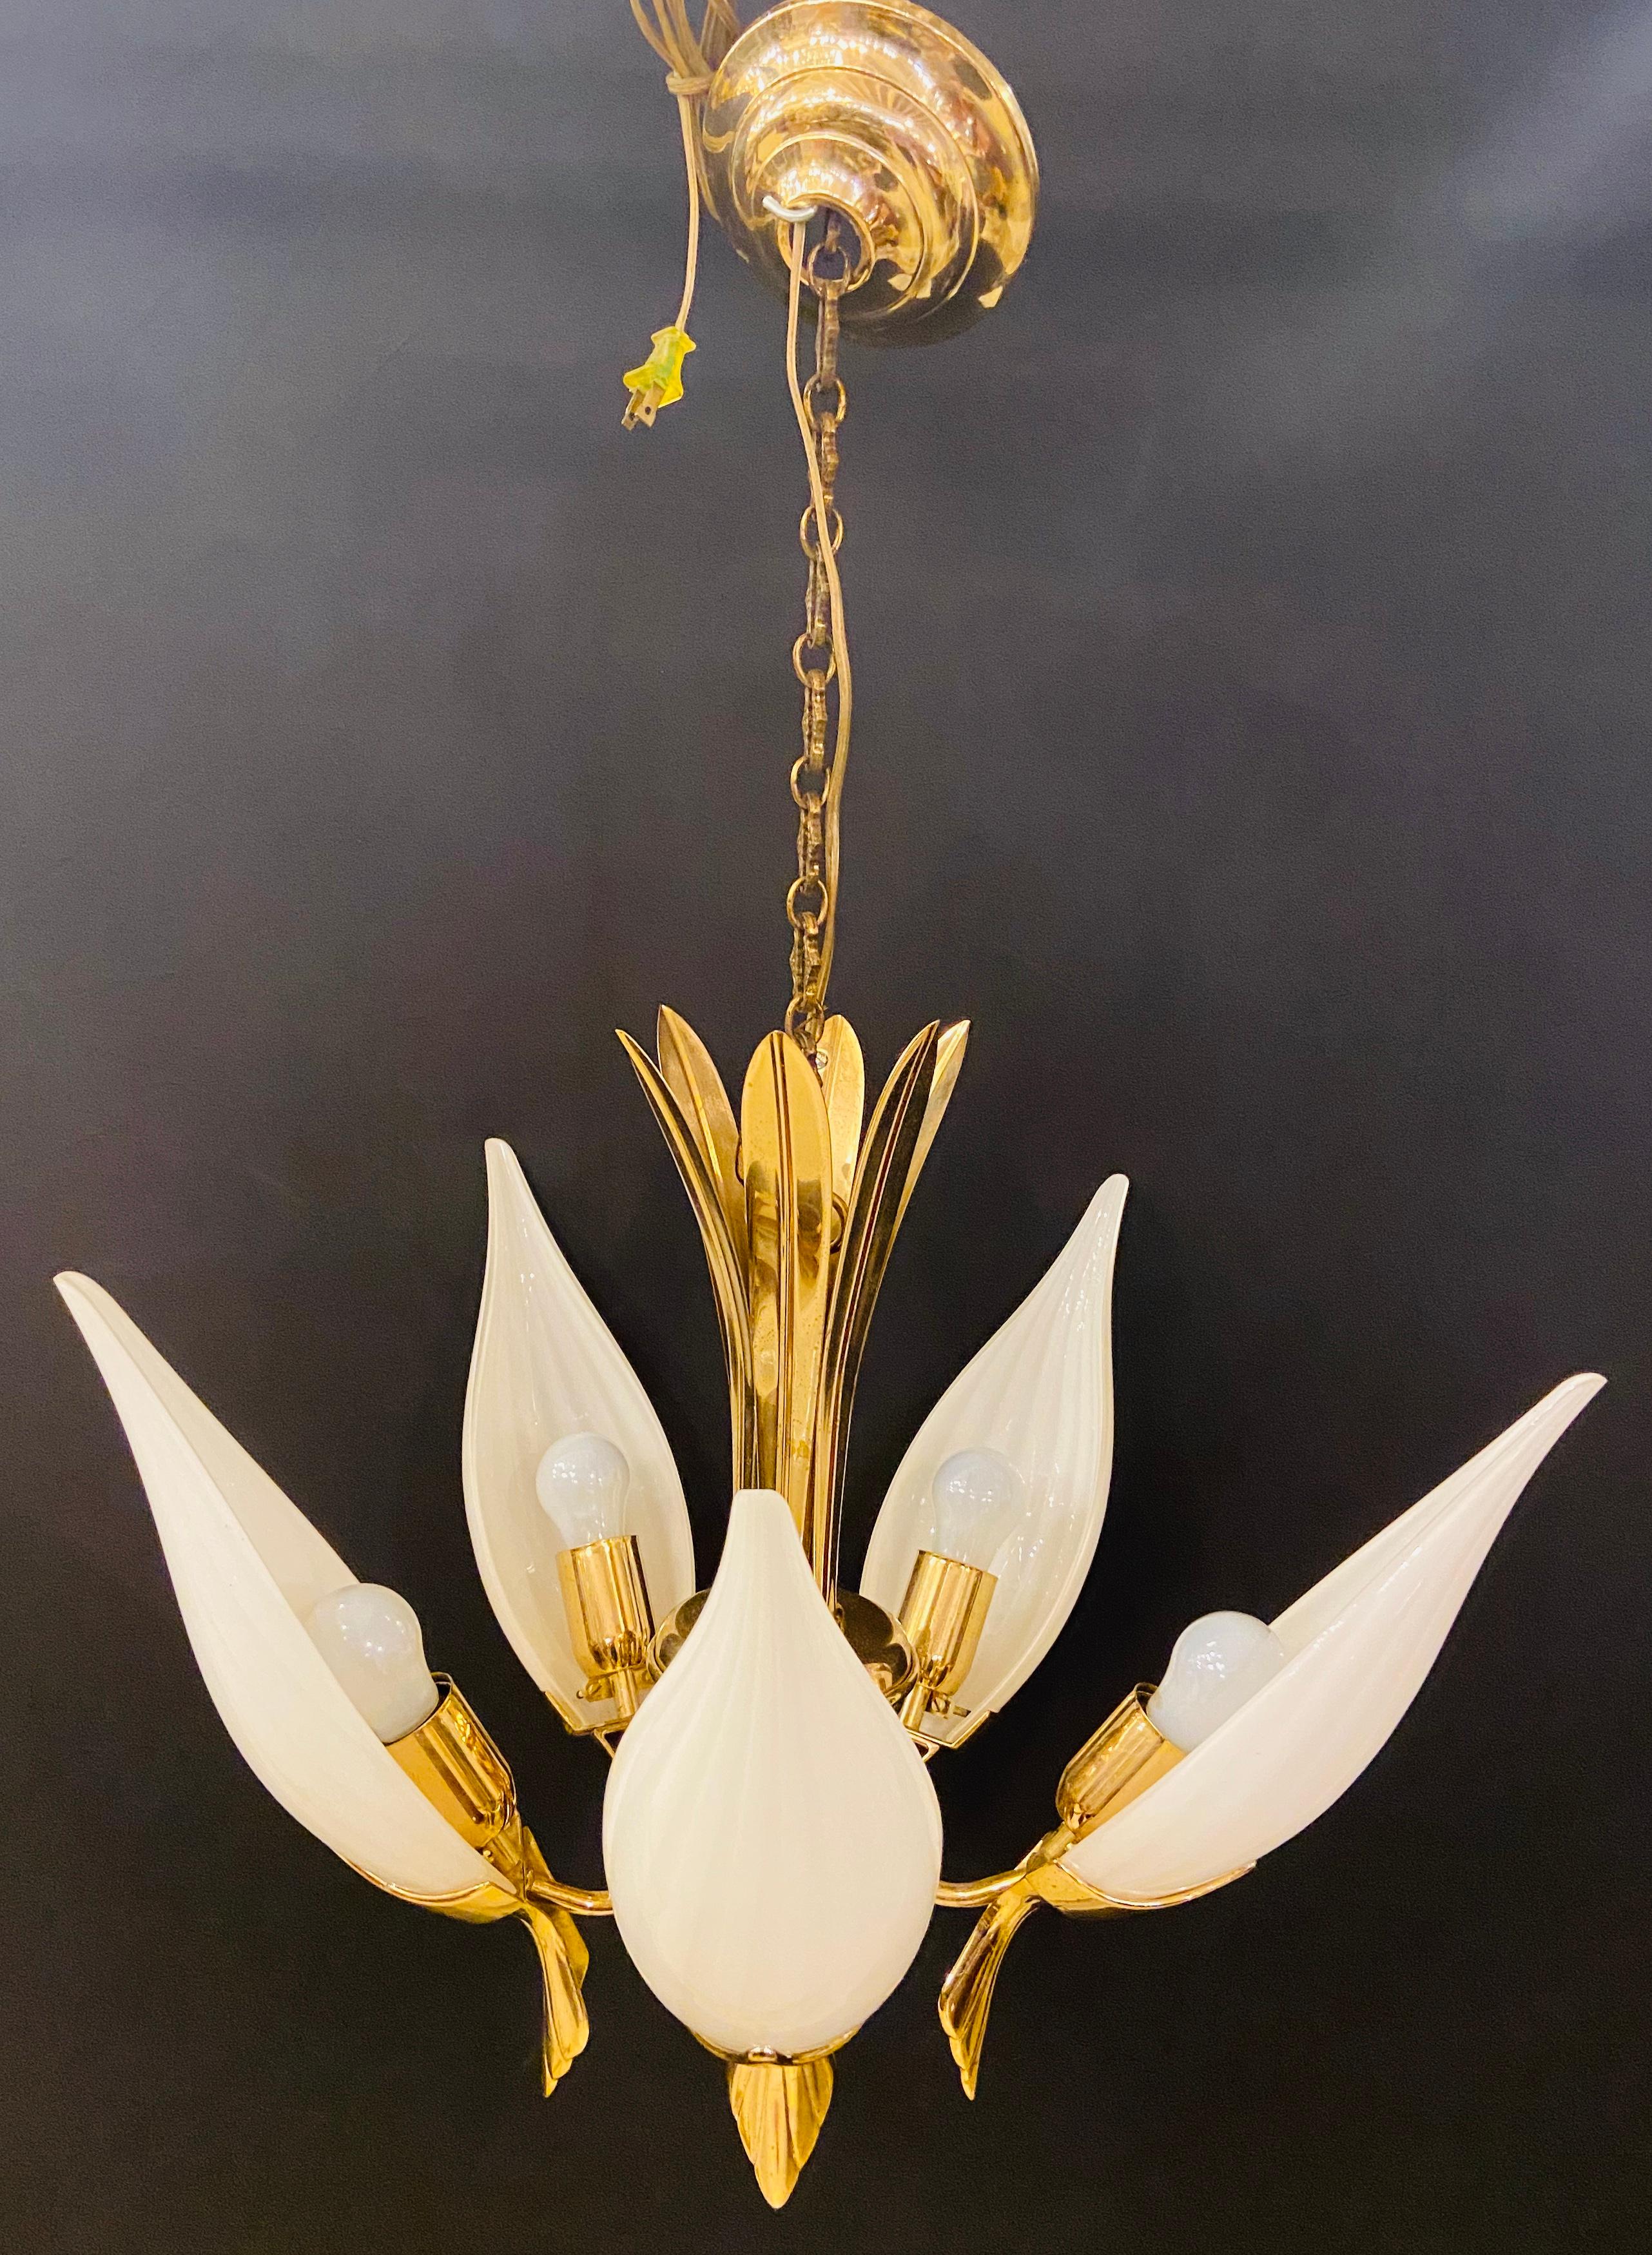 Mid-Century Modern Italian white Tulip milk glass chandelier
This MCM stylish chandelier is made in Italy and features 5 handmade quality milk glass petals in white to form a tulip shape. The chandelier can take 5 bulbs. This beautiful chandelier